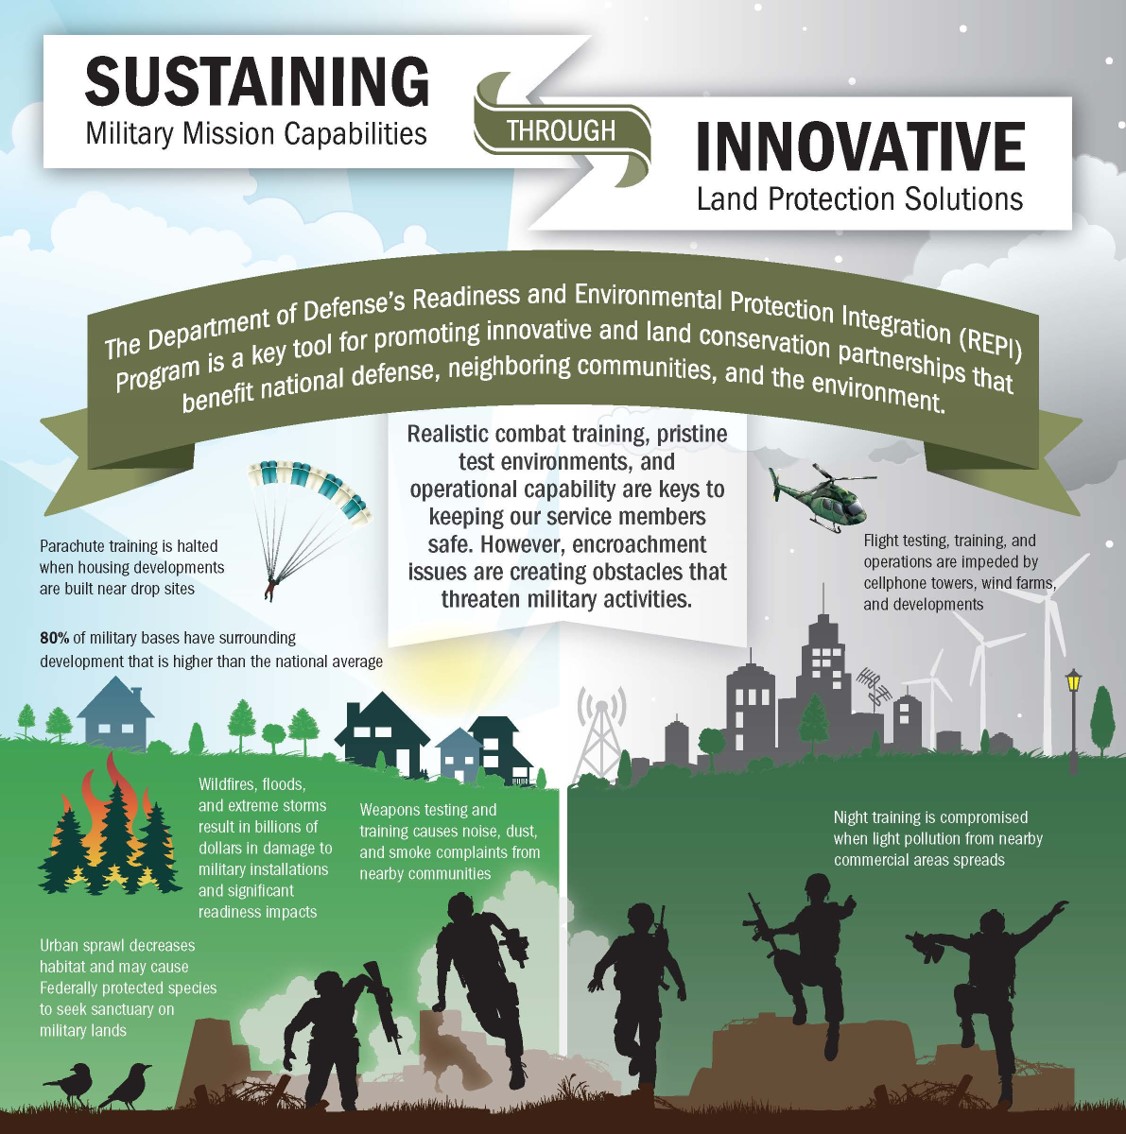 Ways in which the REPI program sustains military mission capabilities through innovative land protection solutions.